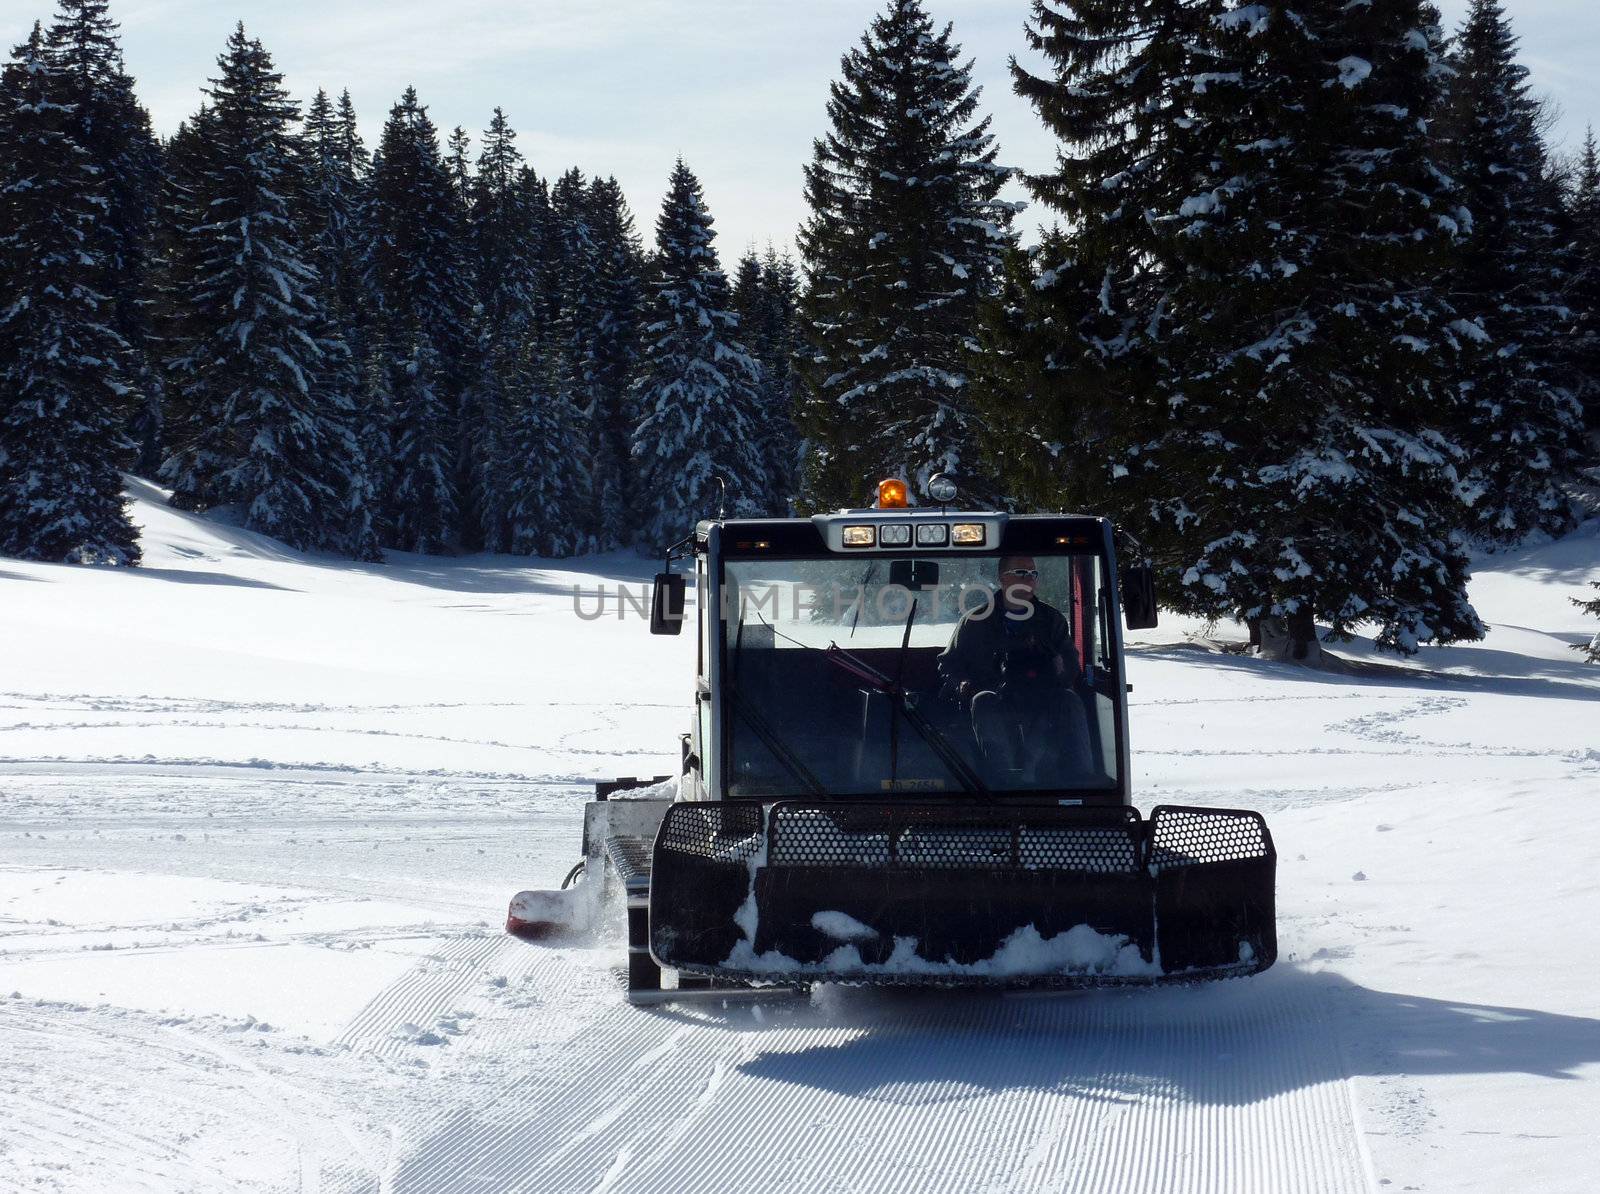 Face of a snowcat driven on the snow with fir trees behind